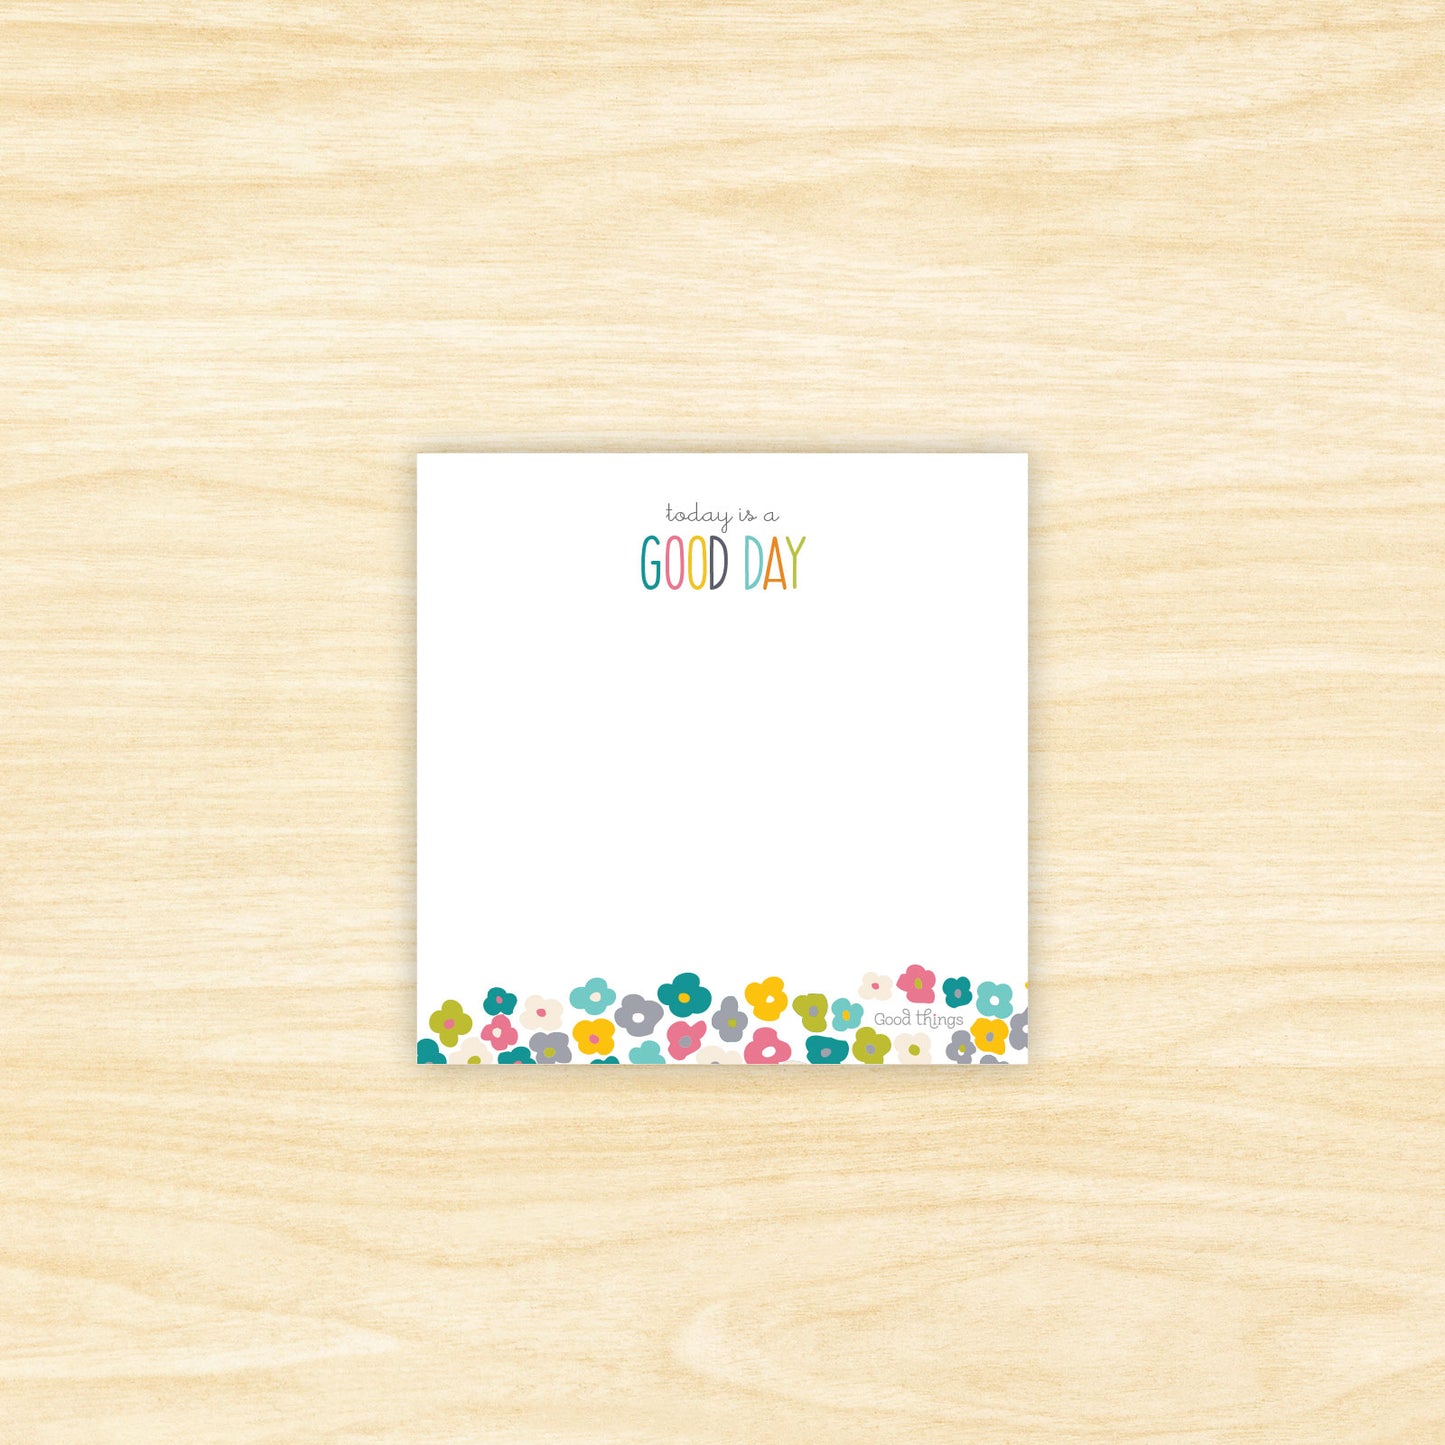 Today is a Good Day Note Pad Set